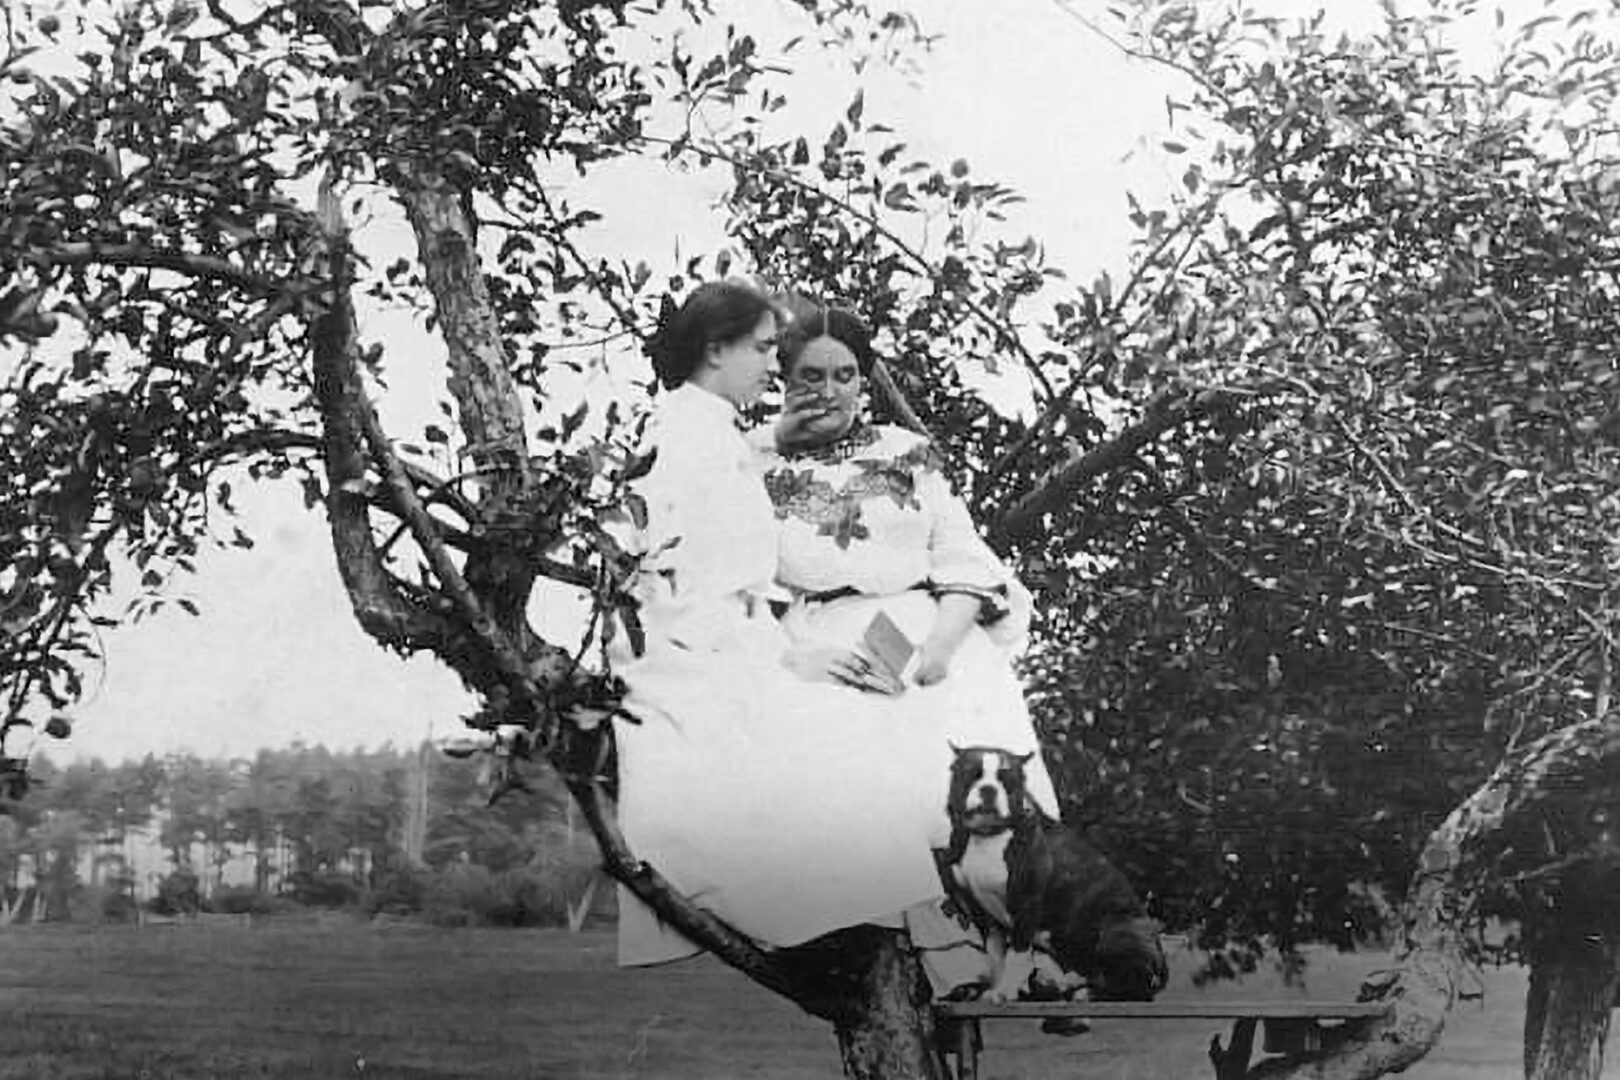 A black and white photo of Helen Keller and her teacher, Anne Sullivan in a tree. They are both reading while wearing white dresses.